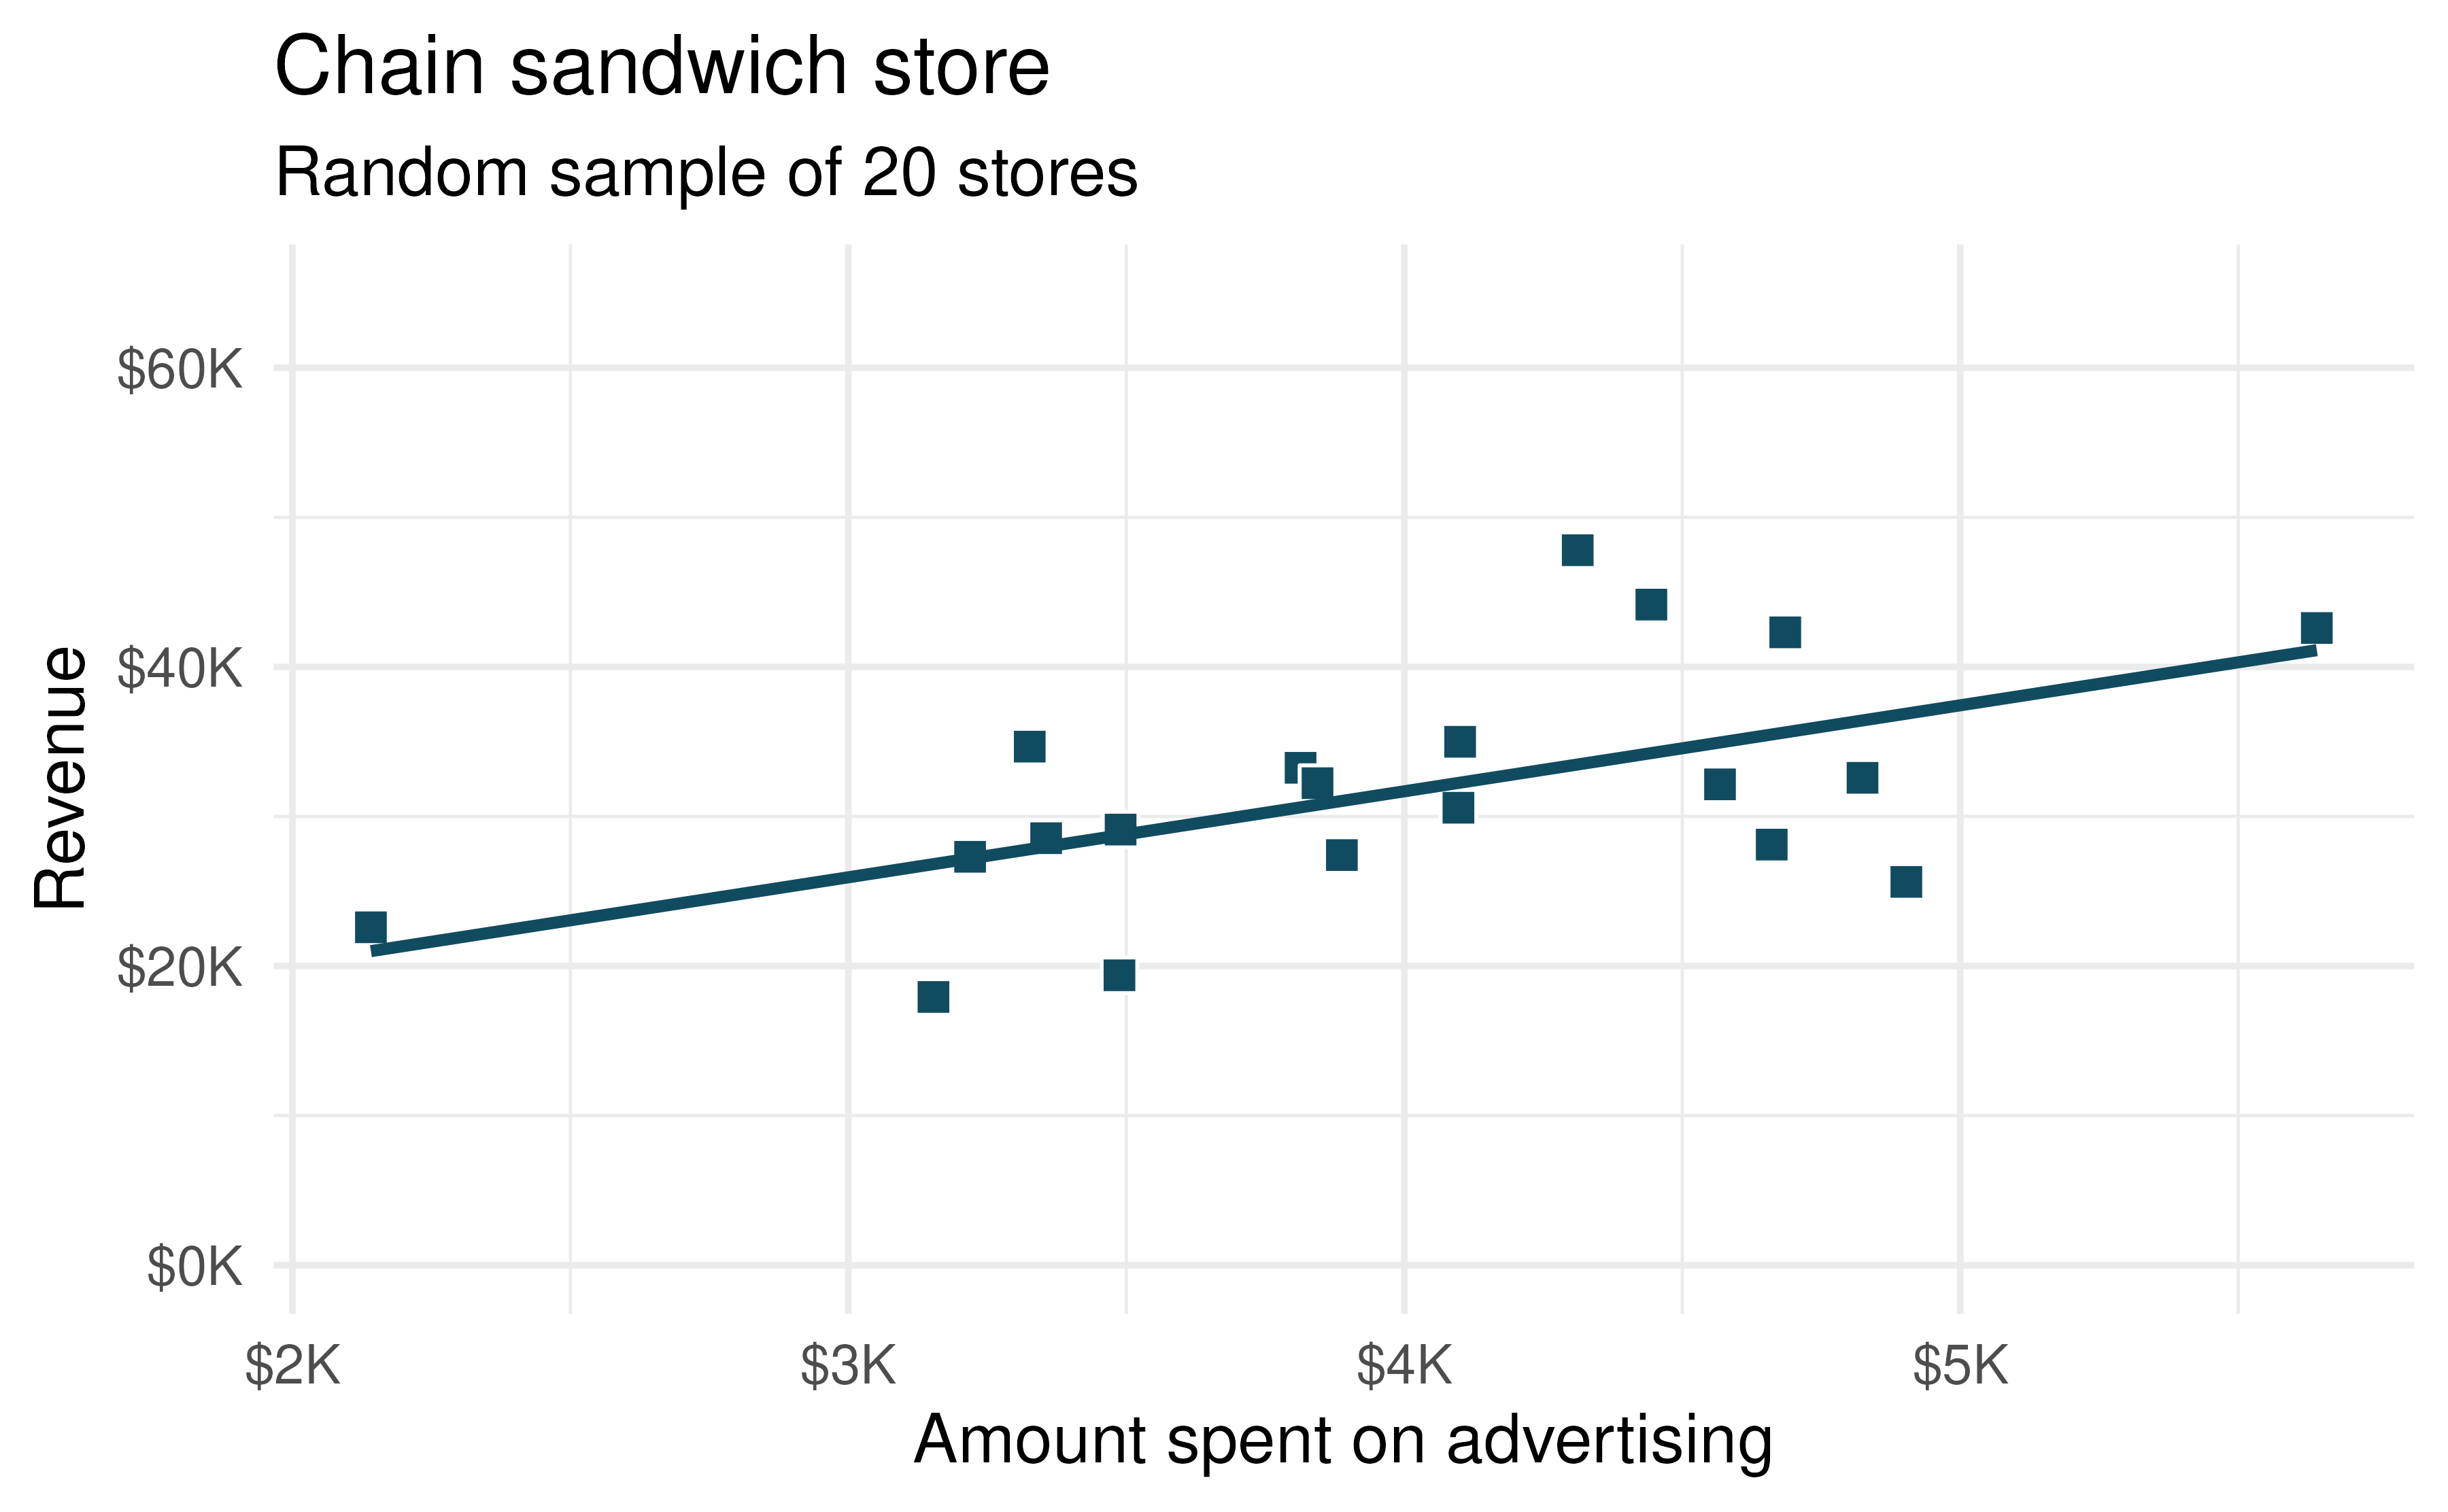 A random sample of 20 stores from the entire population. A linear trend between advertising and revenue continues to be observed.